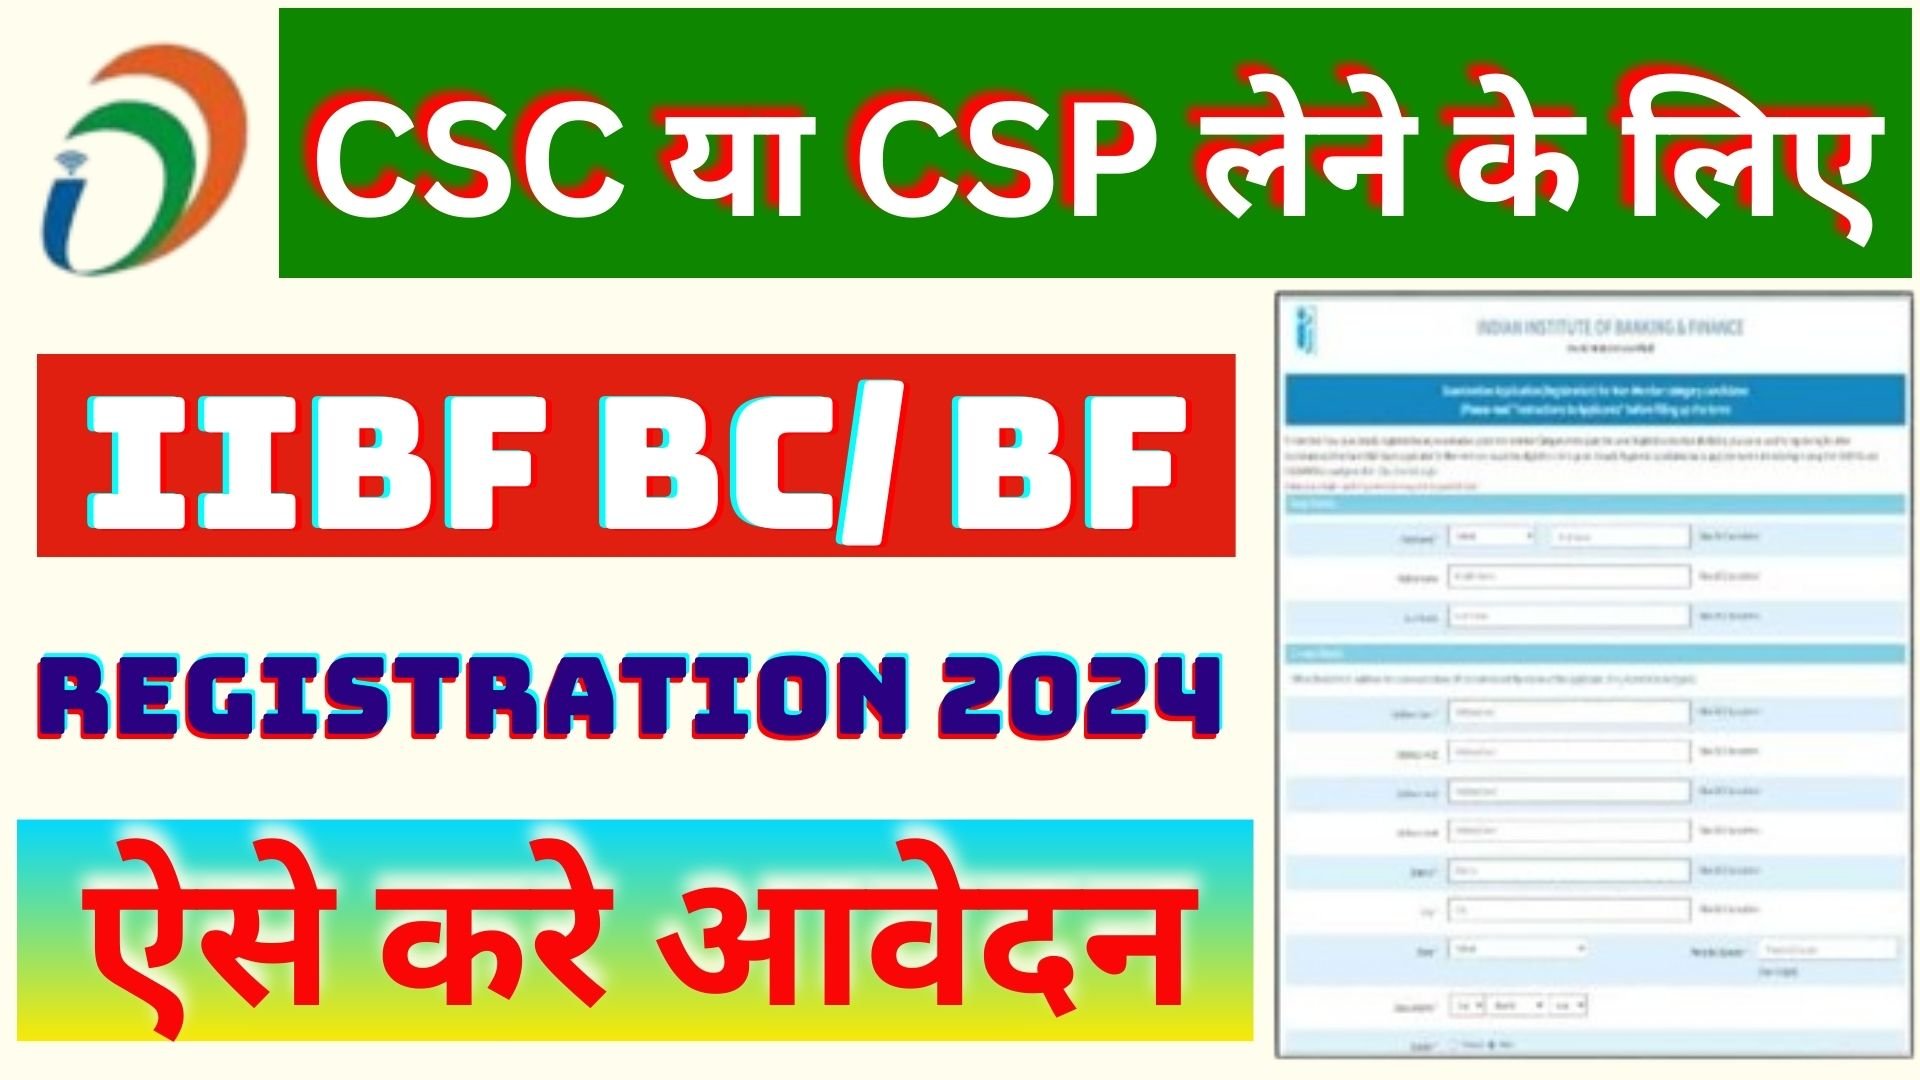 BC Certificate For CSC Registration 2024: BC Certificate Apply Online 2024 | iibf bc certificate Apply